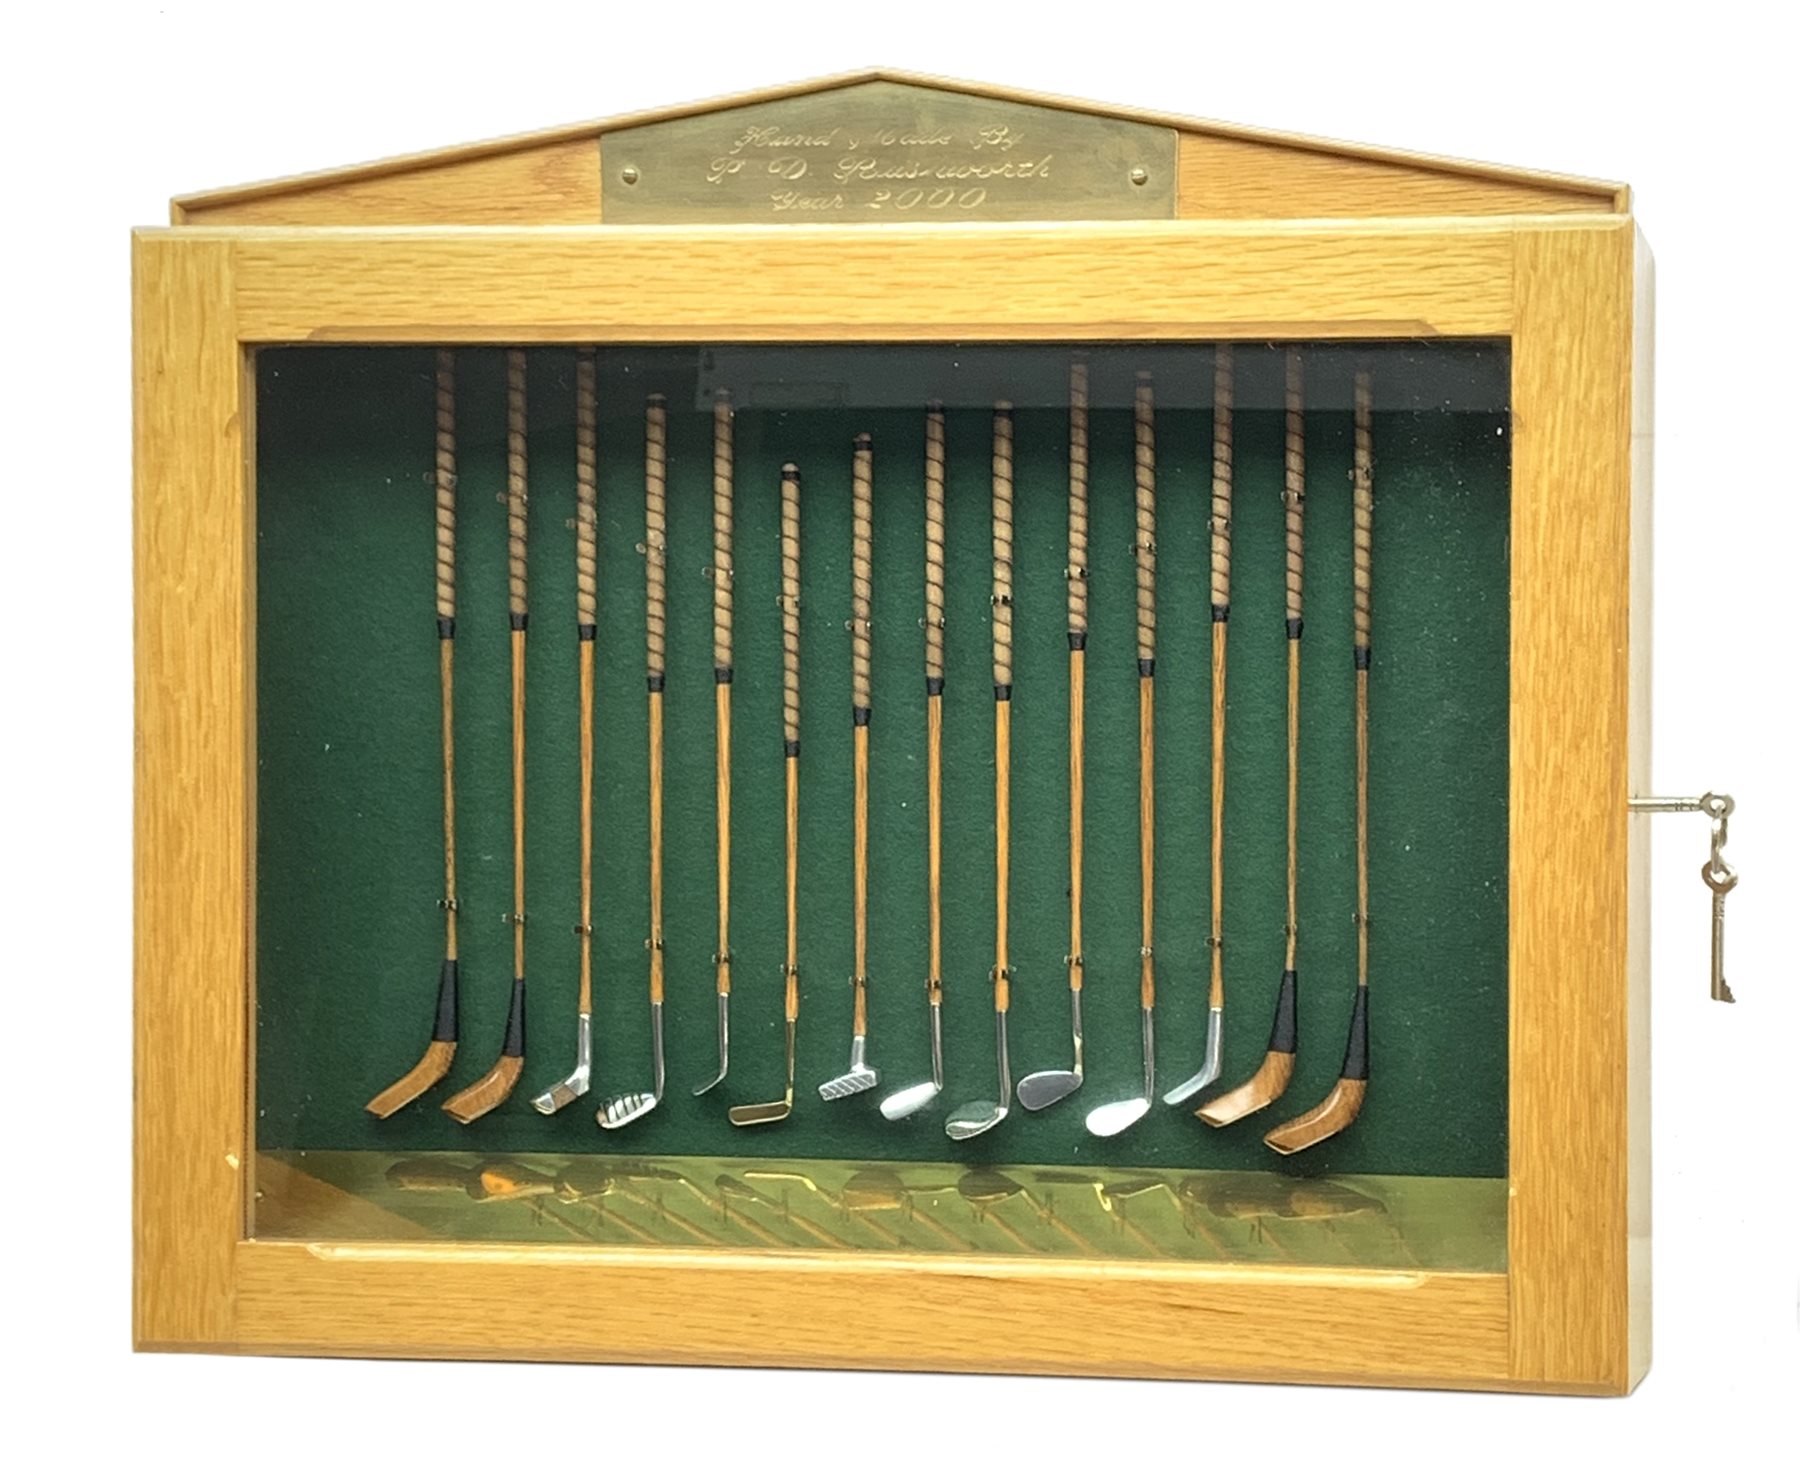 Modern handcrafted miniature set of fourteen 19th century style golf clubs by P.D. Rushworth dated